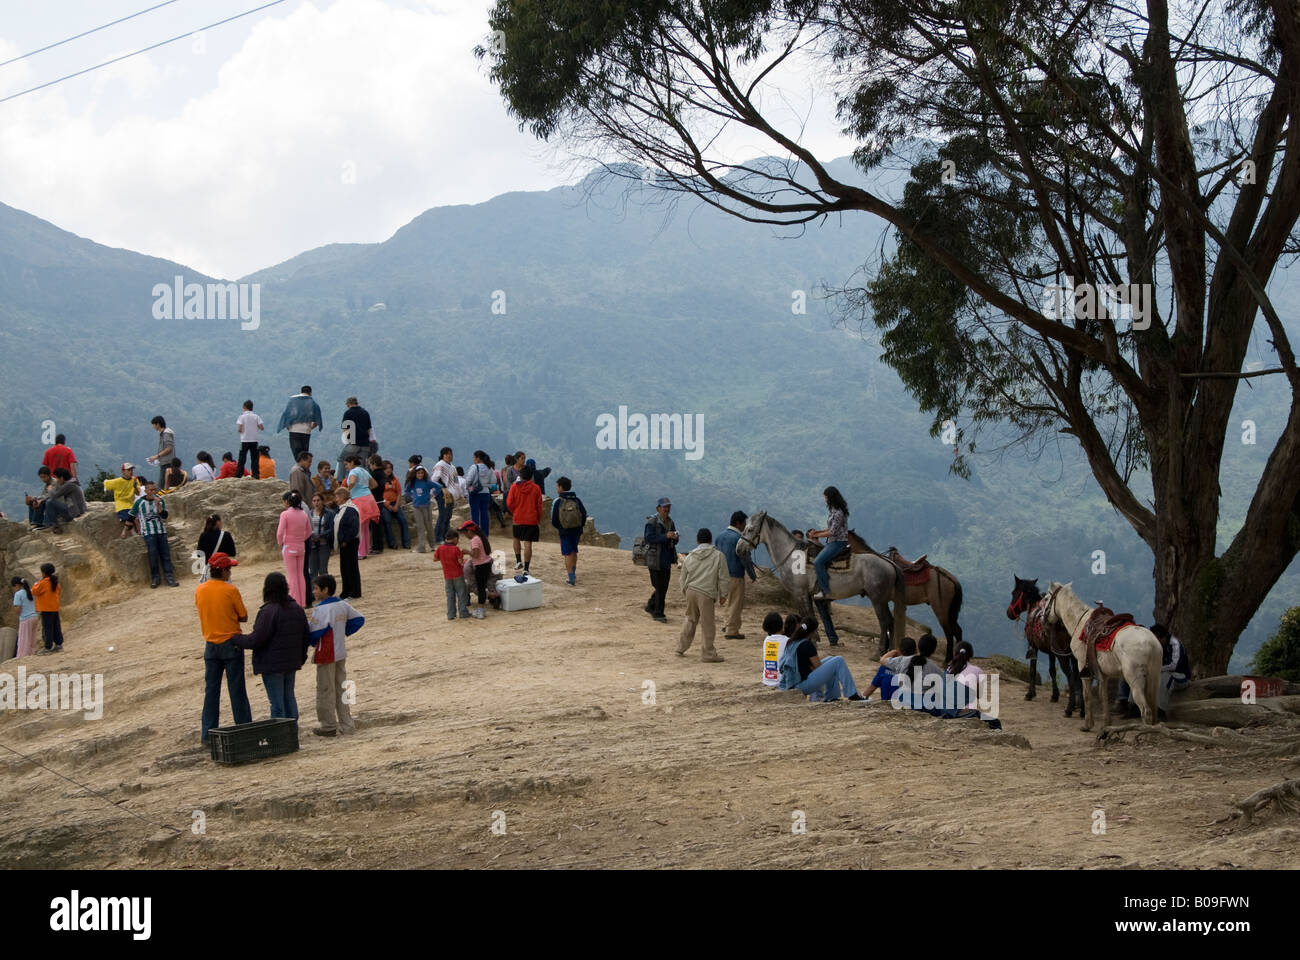 People on day out on the Cerro de Monserrate, Bogota, Colombia Stock Photo